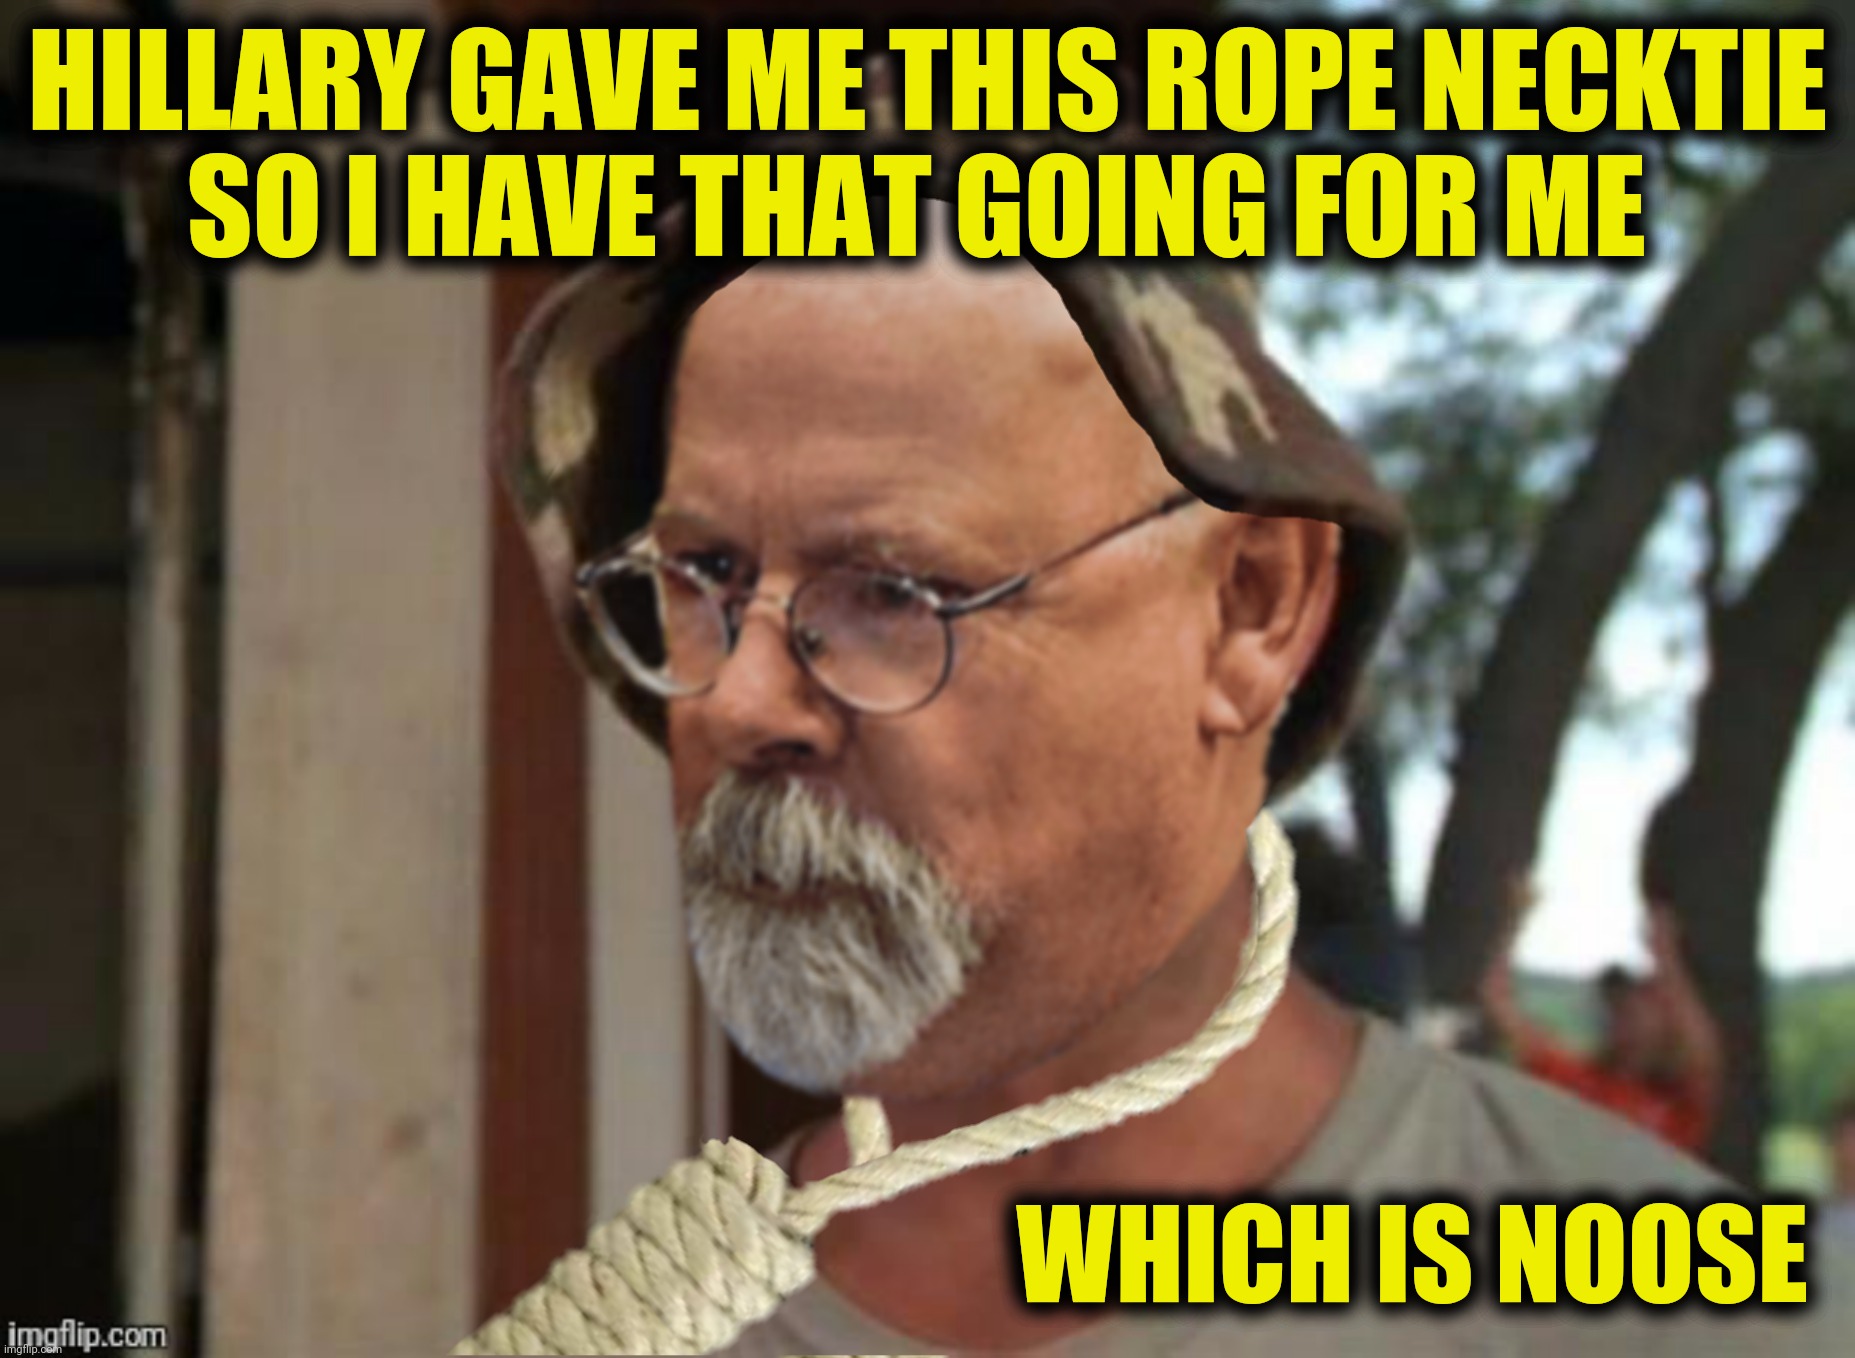 HILLARY GAVE ME THIS ROPE NECKTIE
SO I HAVE THAT GOING FOR ME WHICH IS NOOSE | made w/ Imgflip meme maker